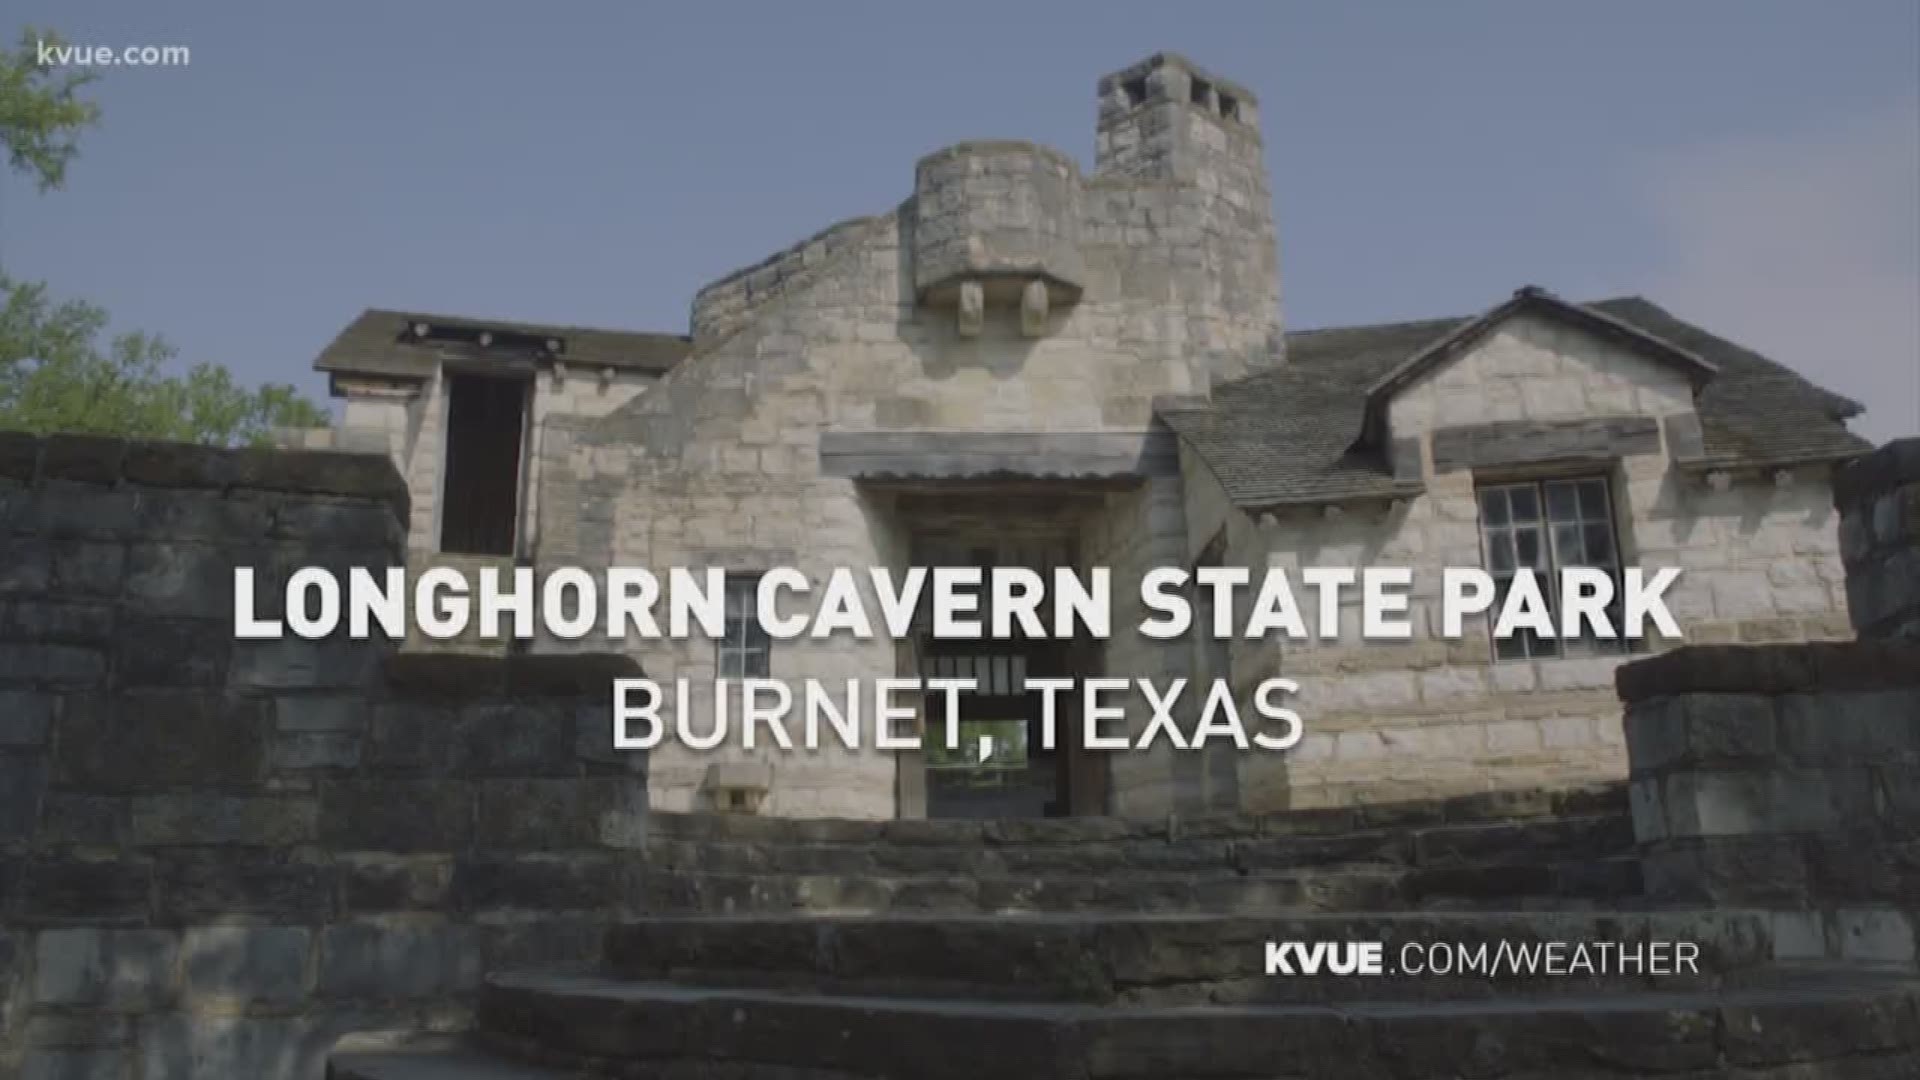 Longhorn Cavern State Park - A family friendly destination full of Texas history, beautiful vistas and miles of limestone caverns.